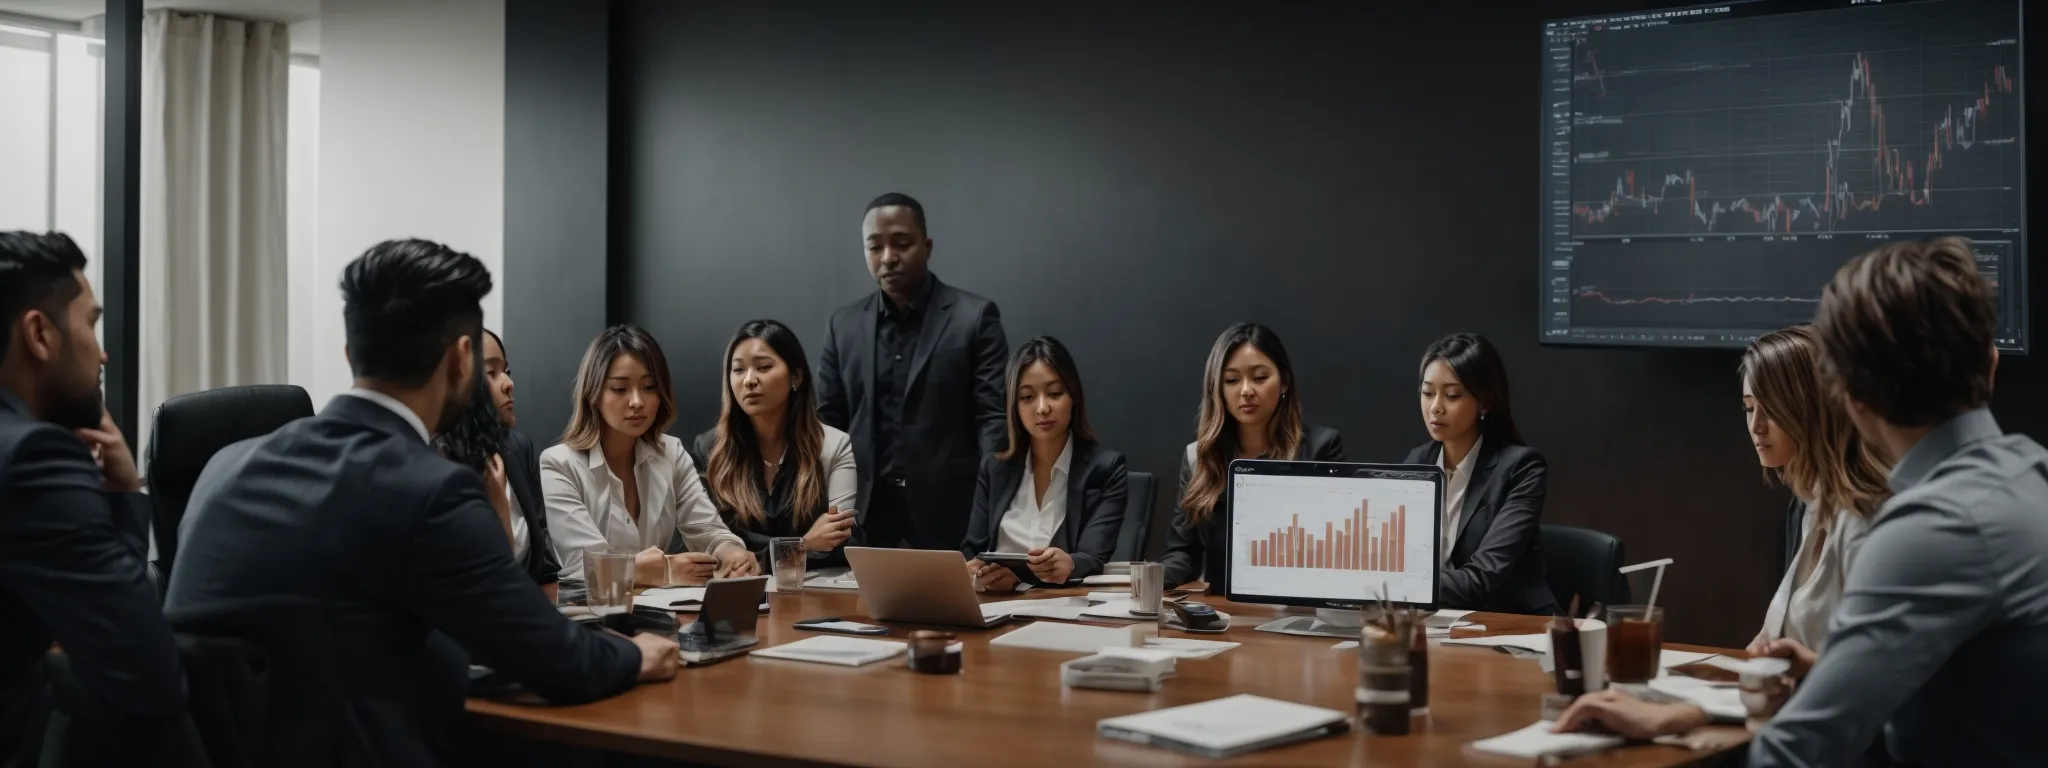 a digital marketing team gathers around a conference table with graphs on a screen, demonstrating the progress and impact of their seo strategies.